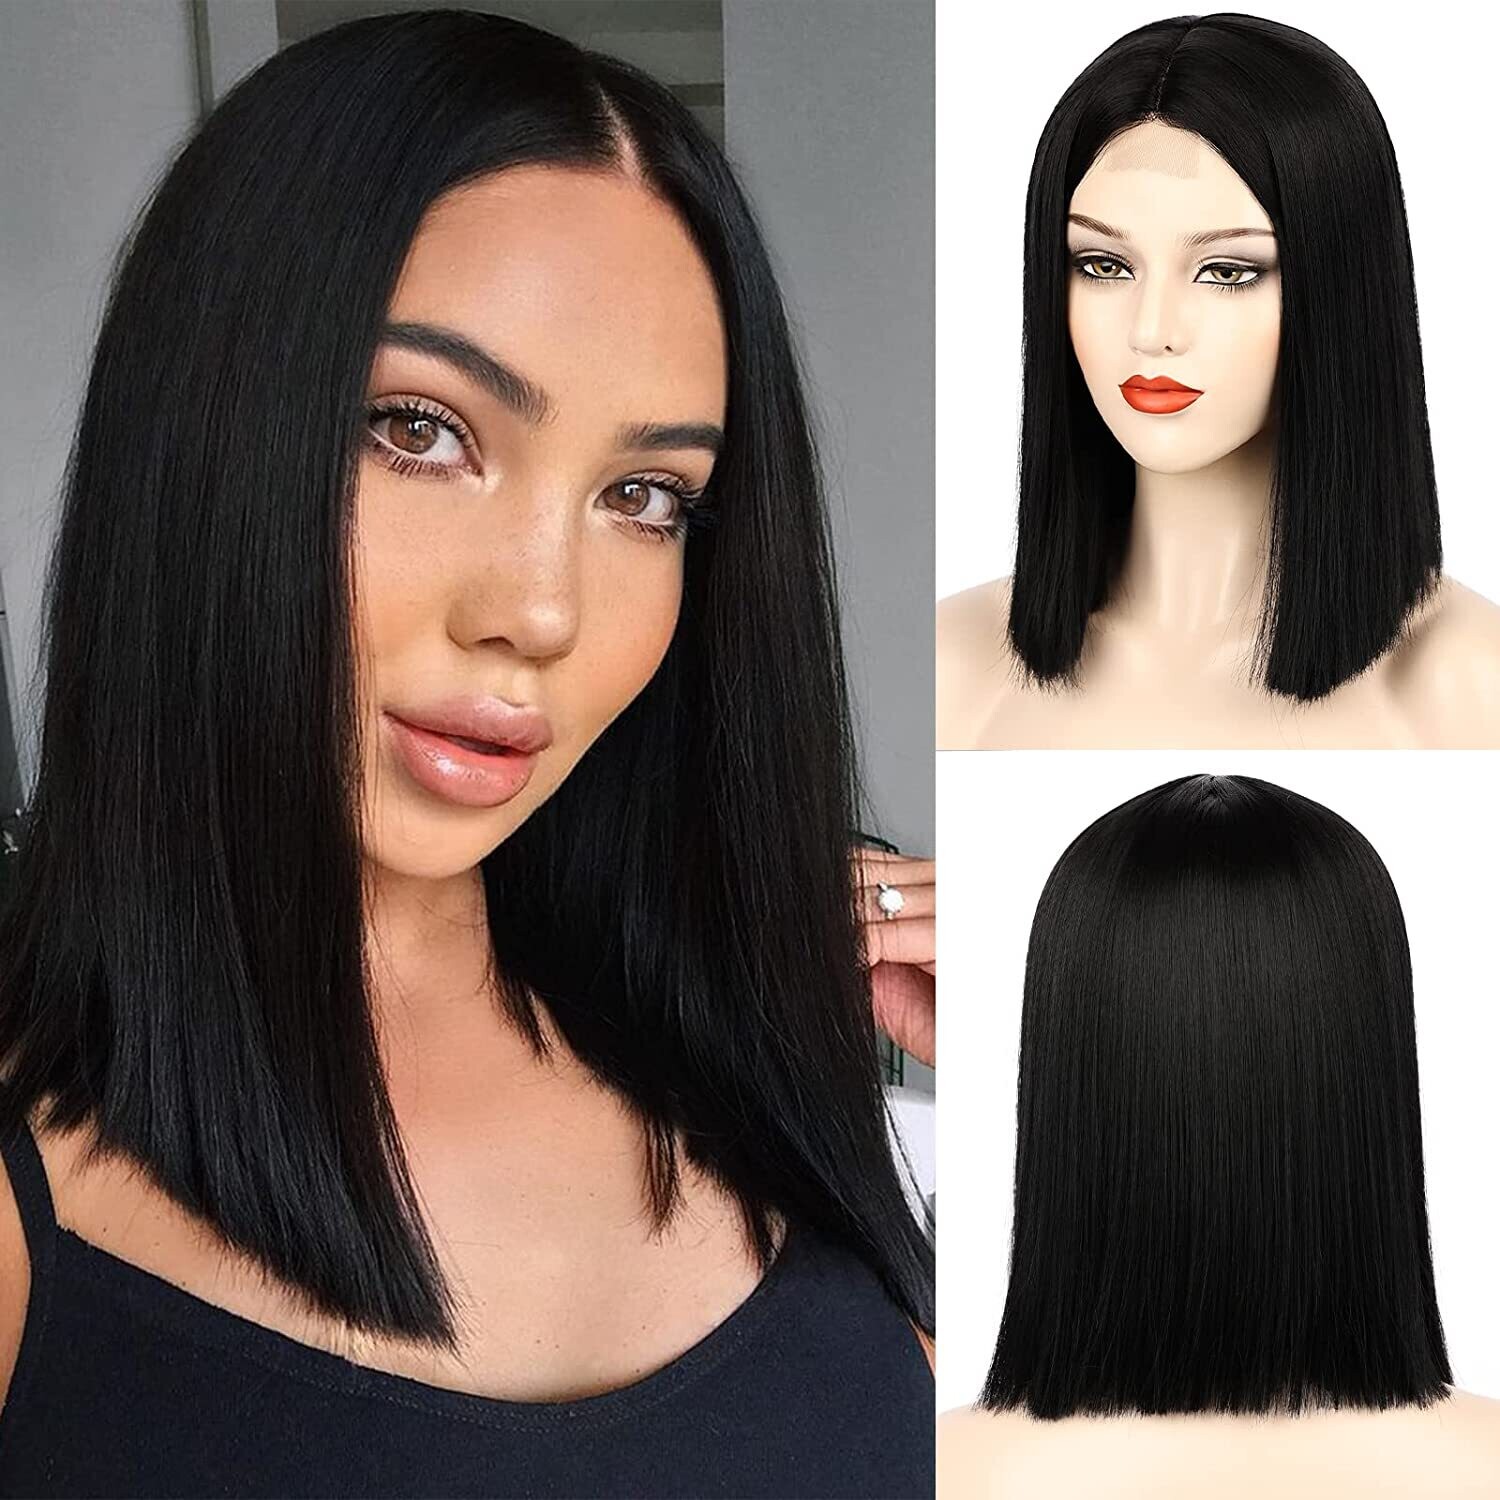 Black Wig Short Hair Wigs for Women Black Wig Straight Bob Wig Synthetic Natural Heat Resistant Side Part Wigs (Black)